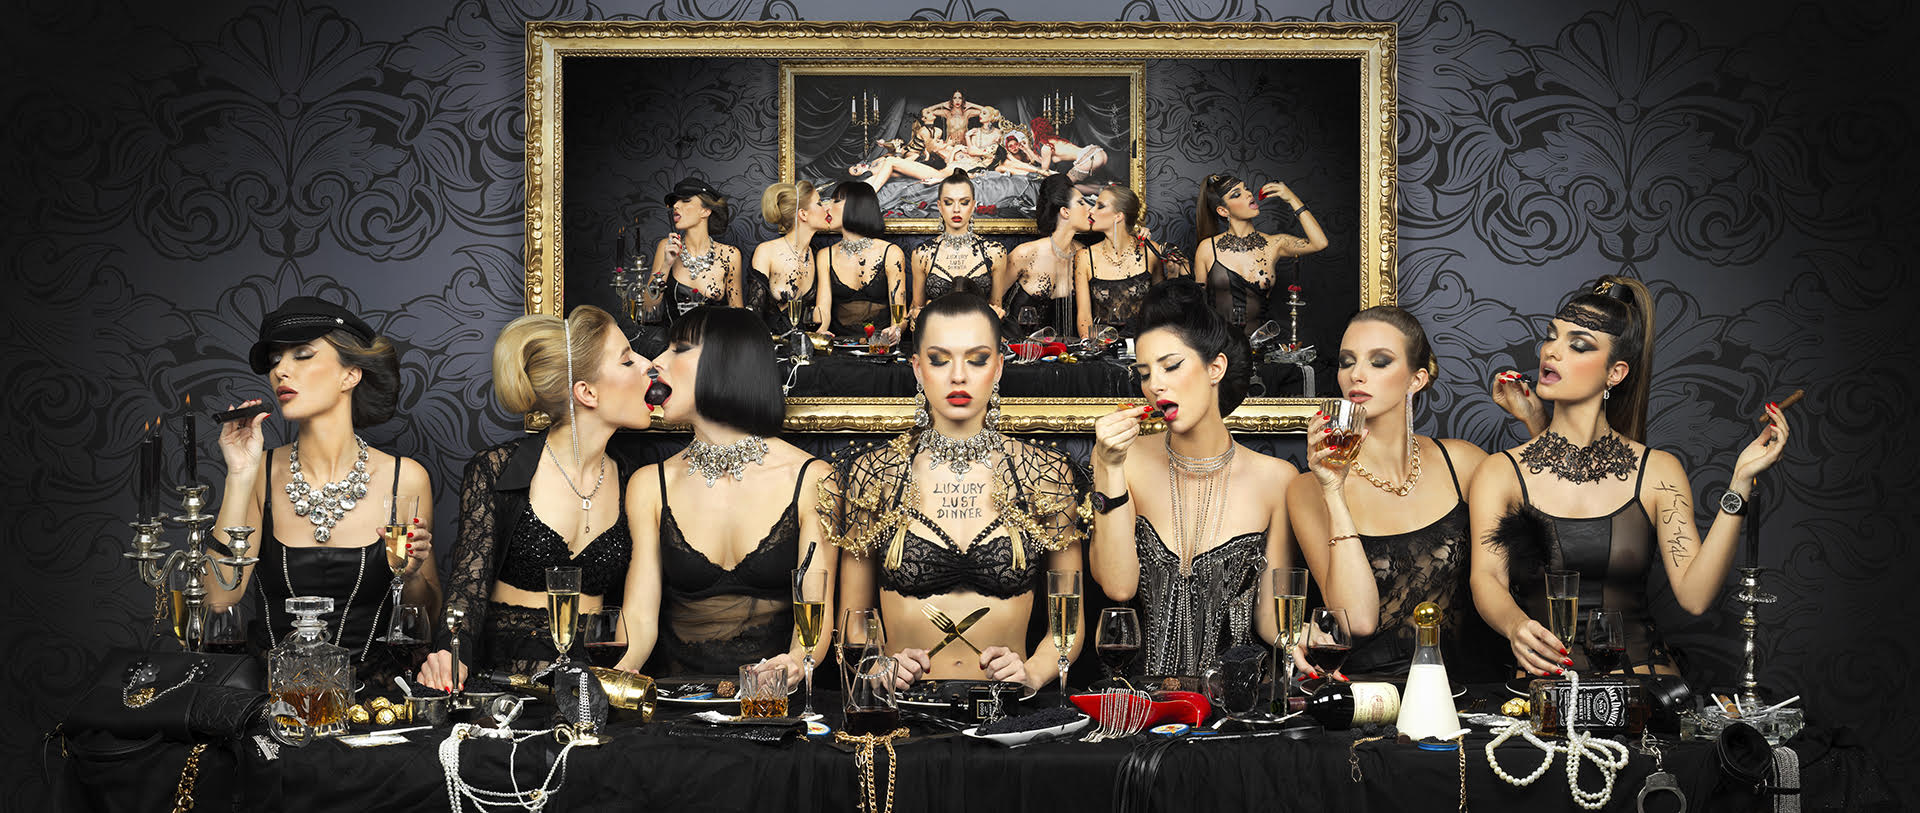 With the "Luxury Lust Dinner" the artist skillfully delves into the seductive sin of lust through his iconic creation, the Luxury Dinner.